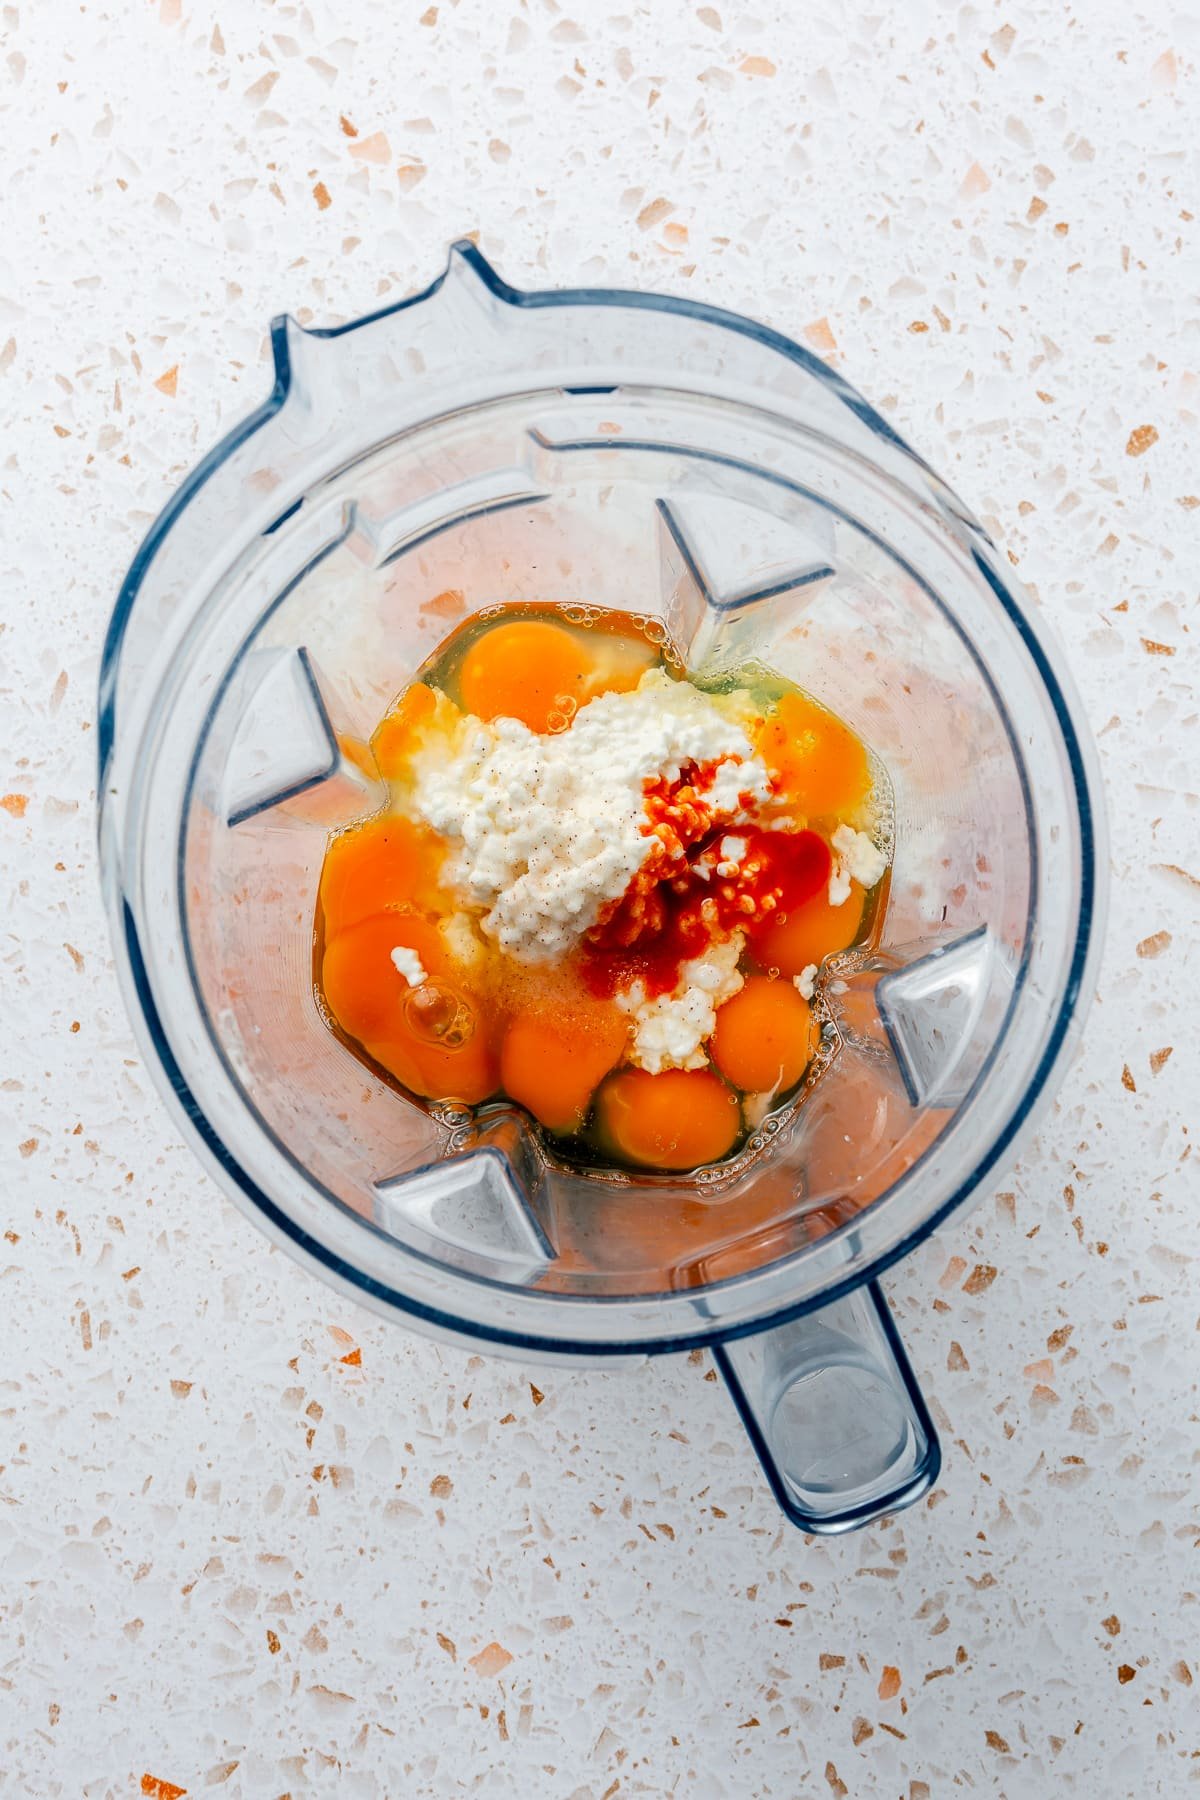 Cracked eggs and a variety of other ingredients have been placed into a blender